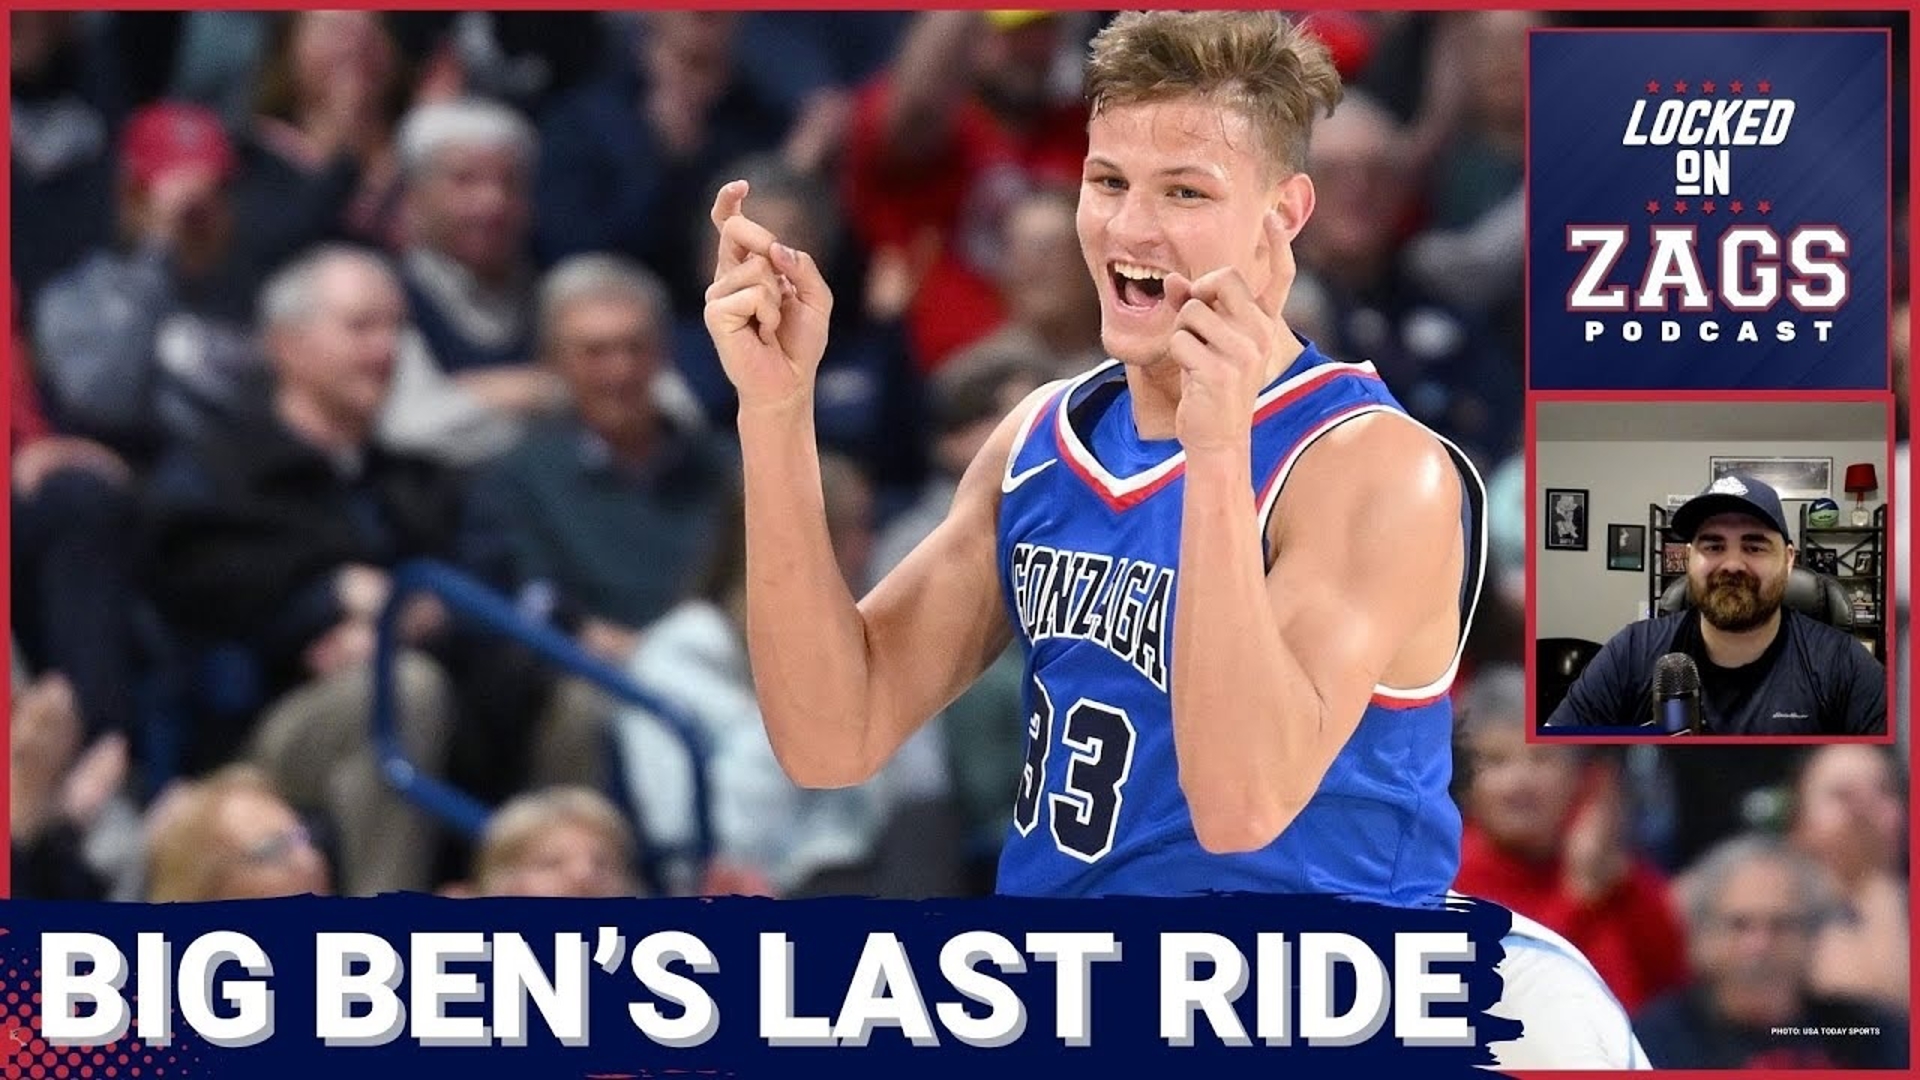 Gonzaga Bulldogs forward Ben Gregg was inserted into the starting lineup by Mark Few and blossomed into a key piece for the Zags.